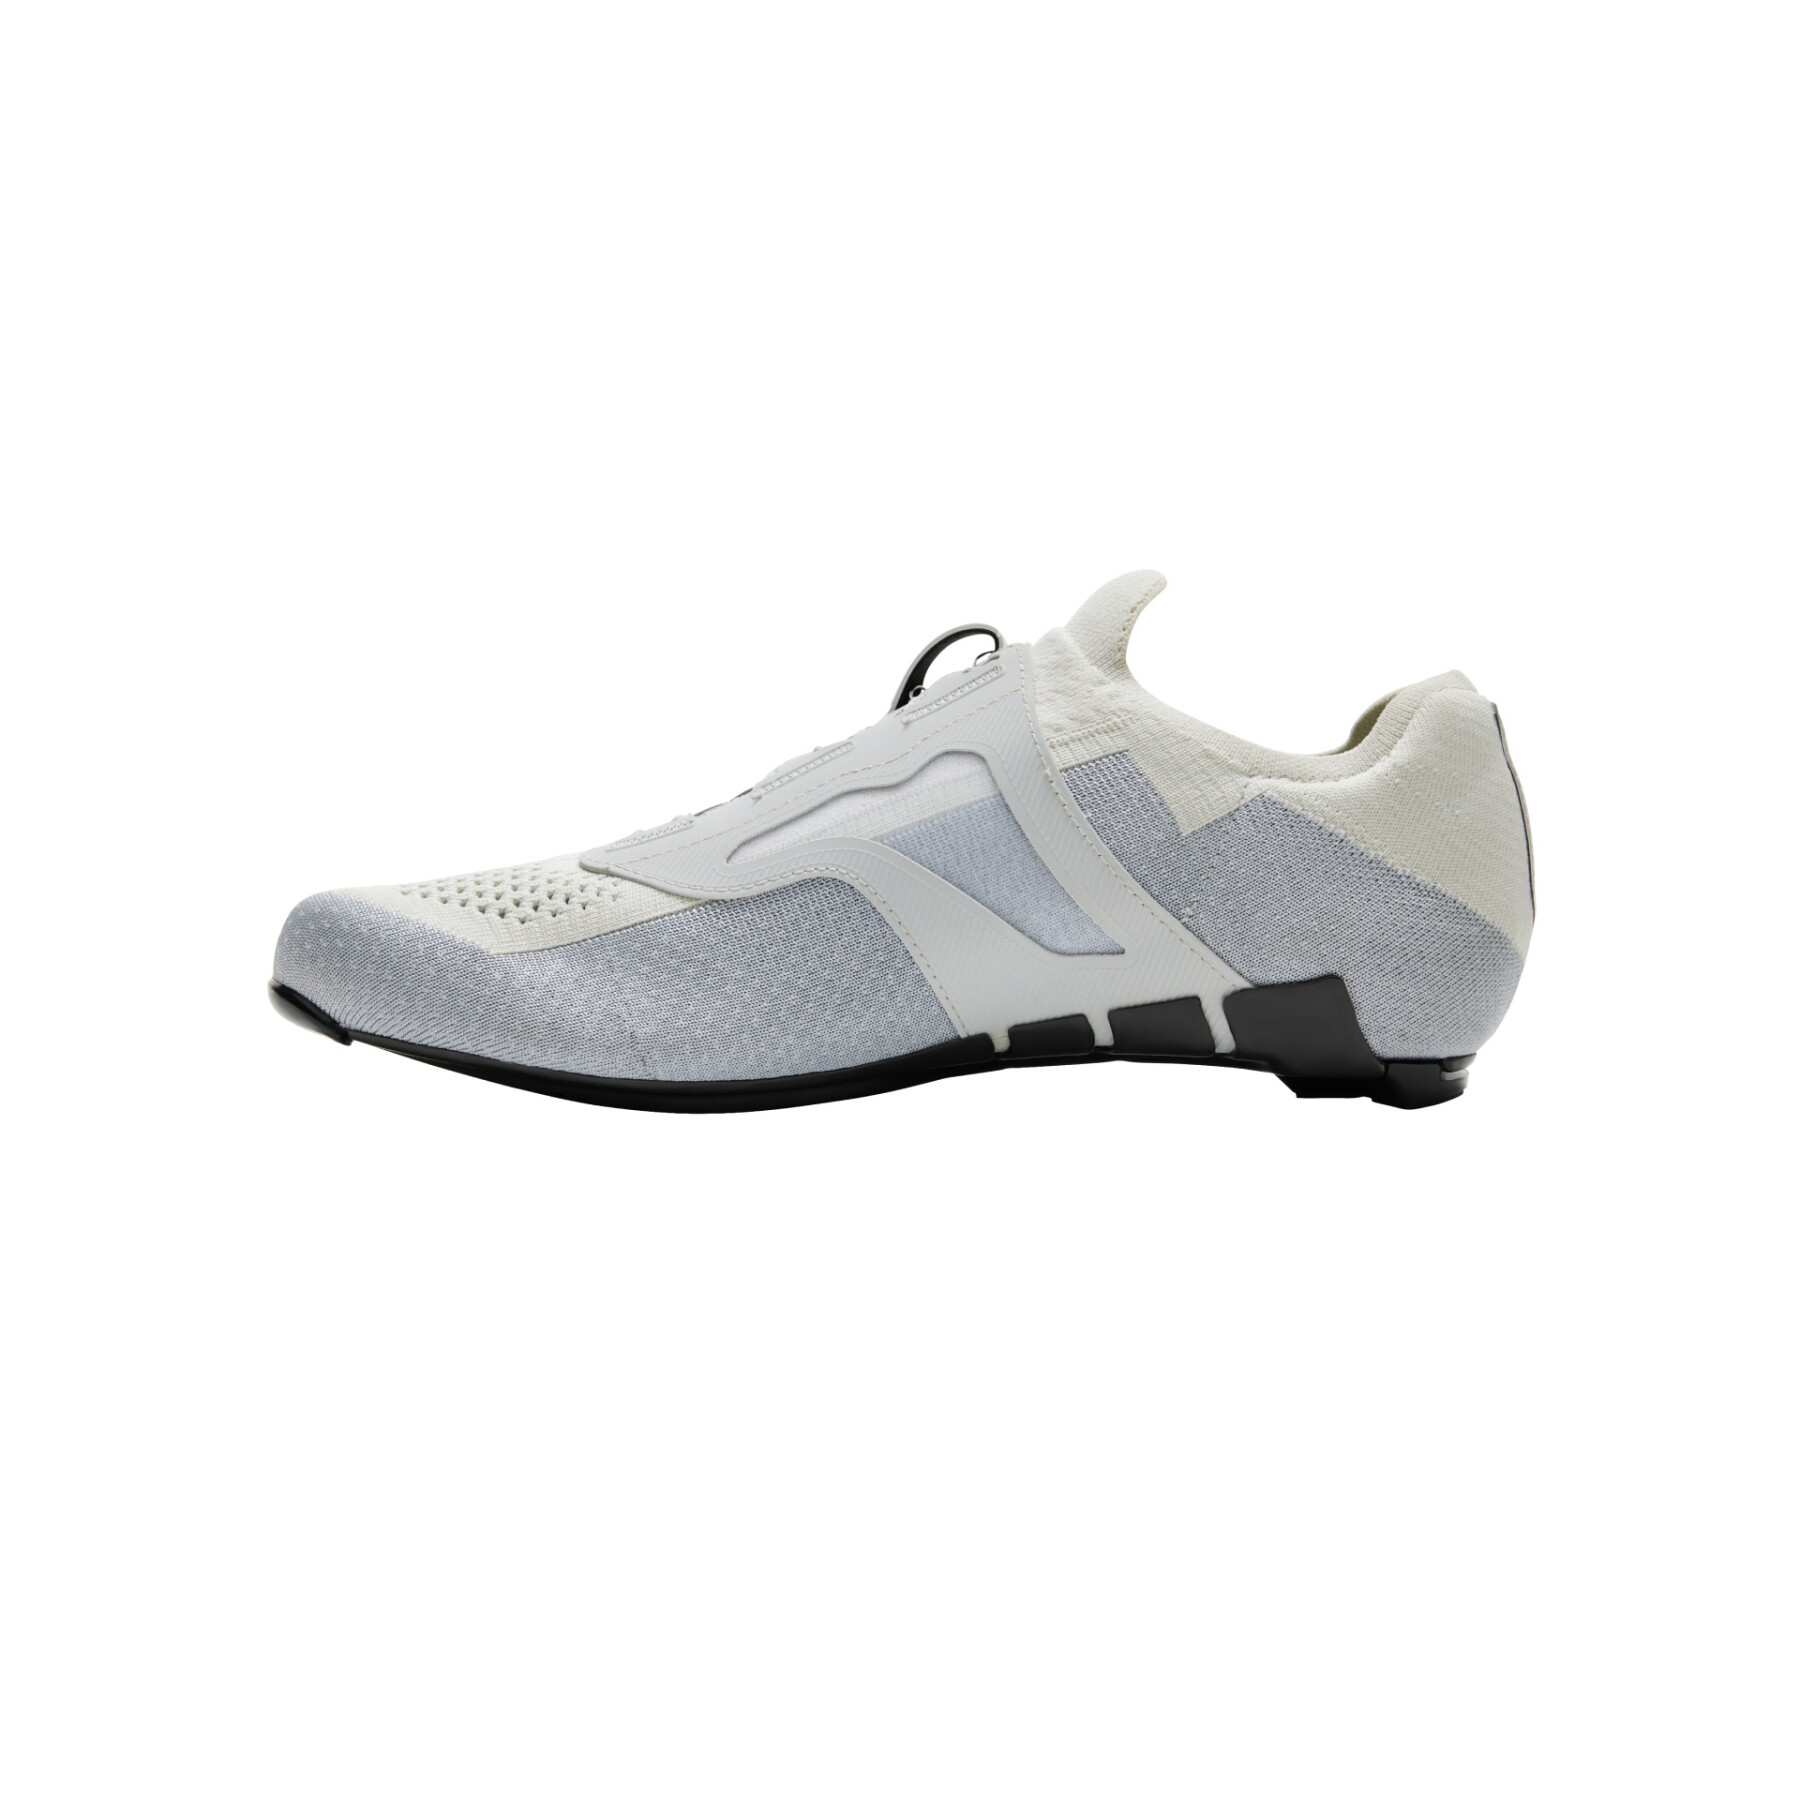 Chaussures Q36.5 Dottore Clima